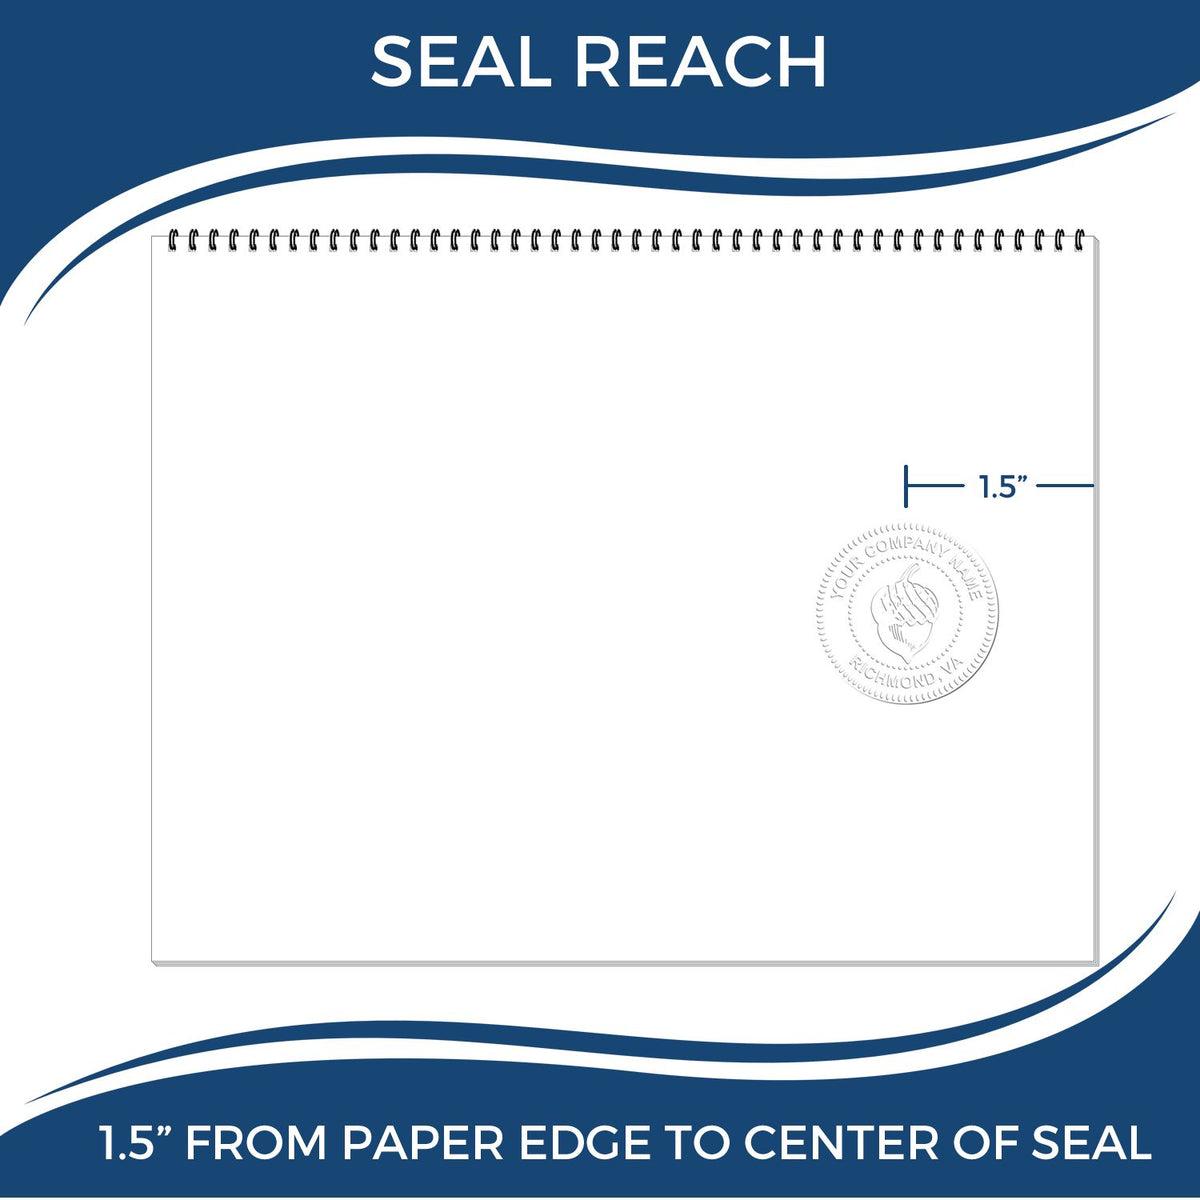 An infographic showing the seal reach which is represented by a ruler and a miniature seal image of the Handheld Arizona Land Surveyor Seal